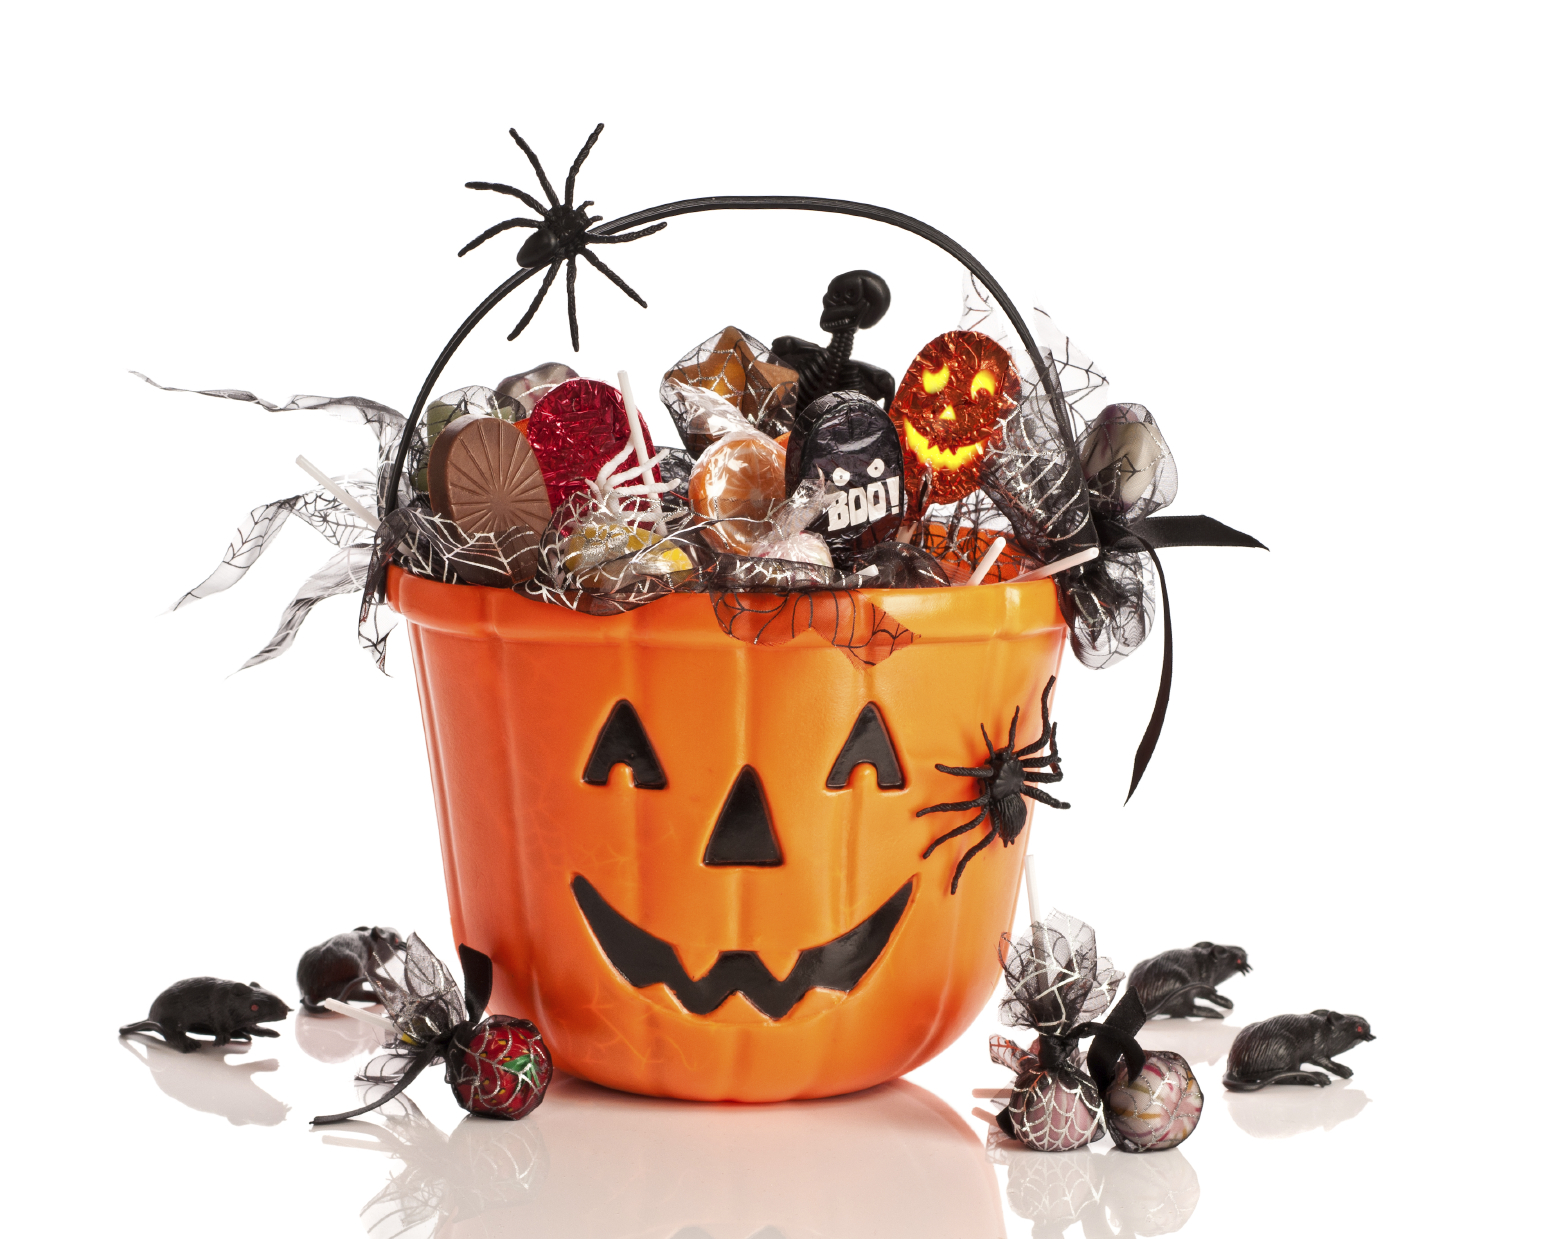 Trick or Treat: Give Me Something Healthy to Eat – Health Advocate Blog